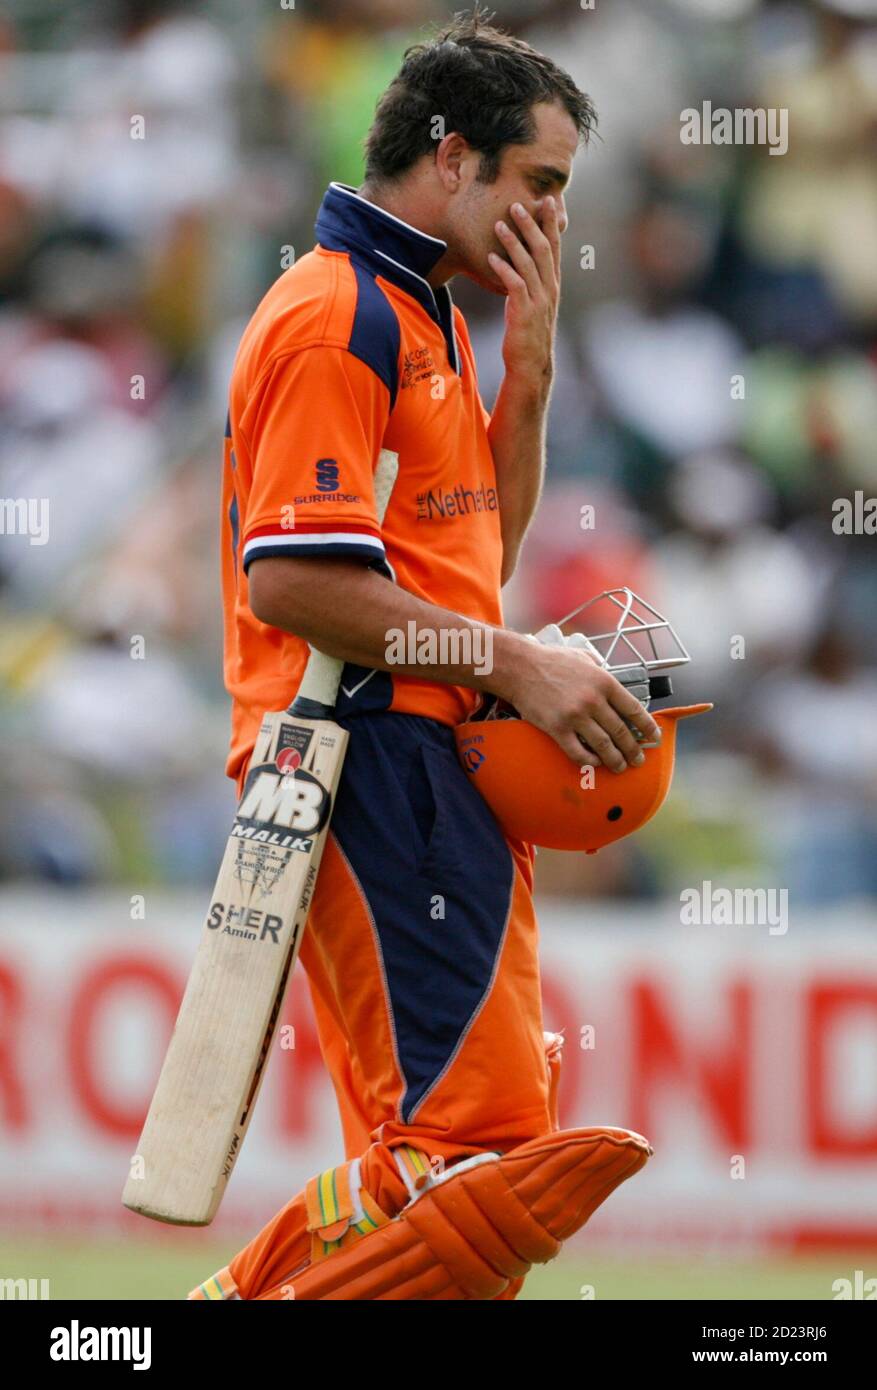 peter-borren-of-the-netherlands-reacts-after-being-dismissed-during-the-world-cup-cricket-match-against-australia-in-basseterre-on-st-kitts-march-18-2007-mobiles-out-editorial-use-only-reuterstim-wimborne-st-kitts-and-nevis-2D23RJ6.jpg